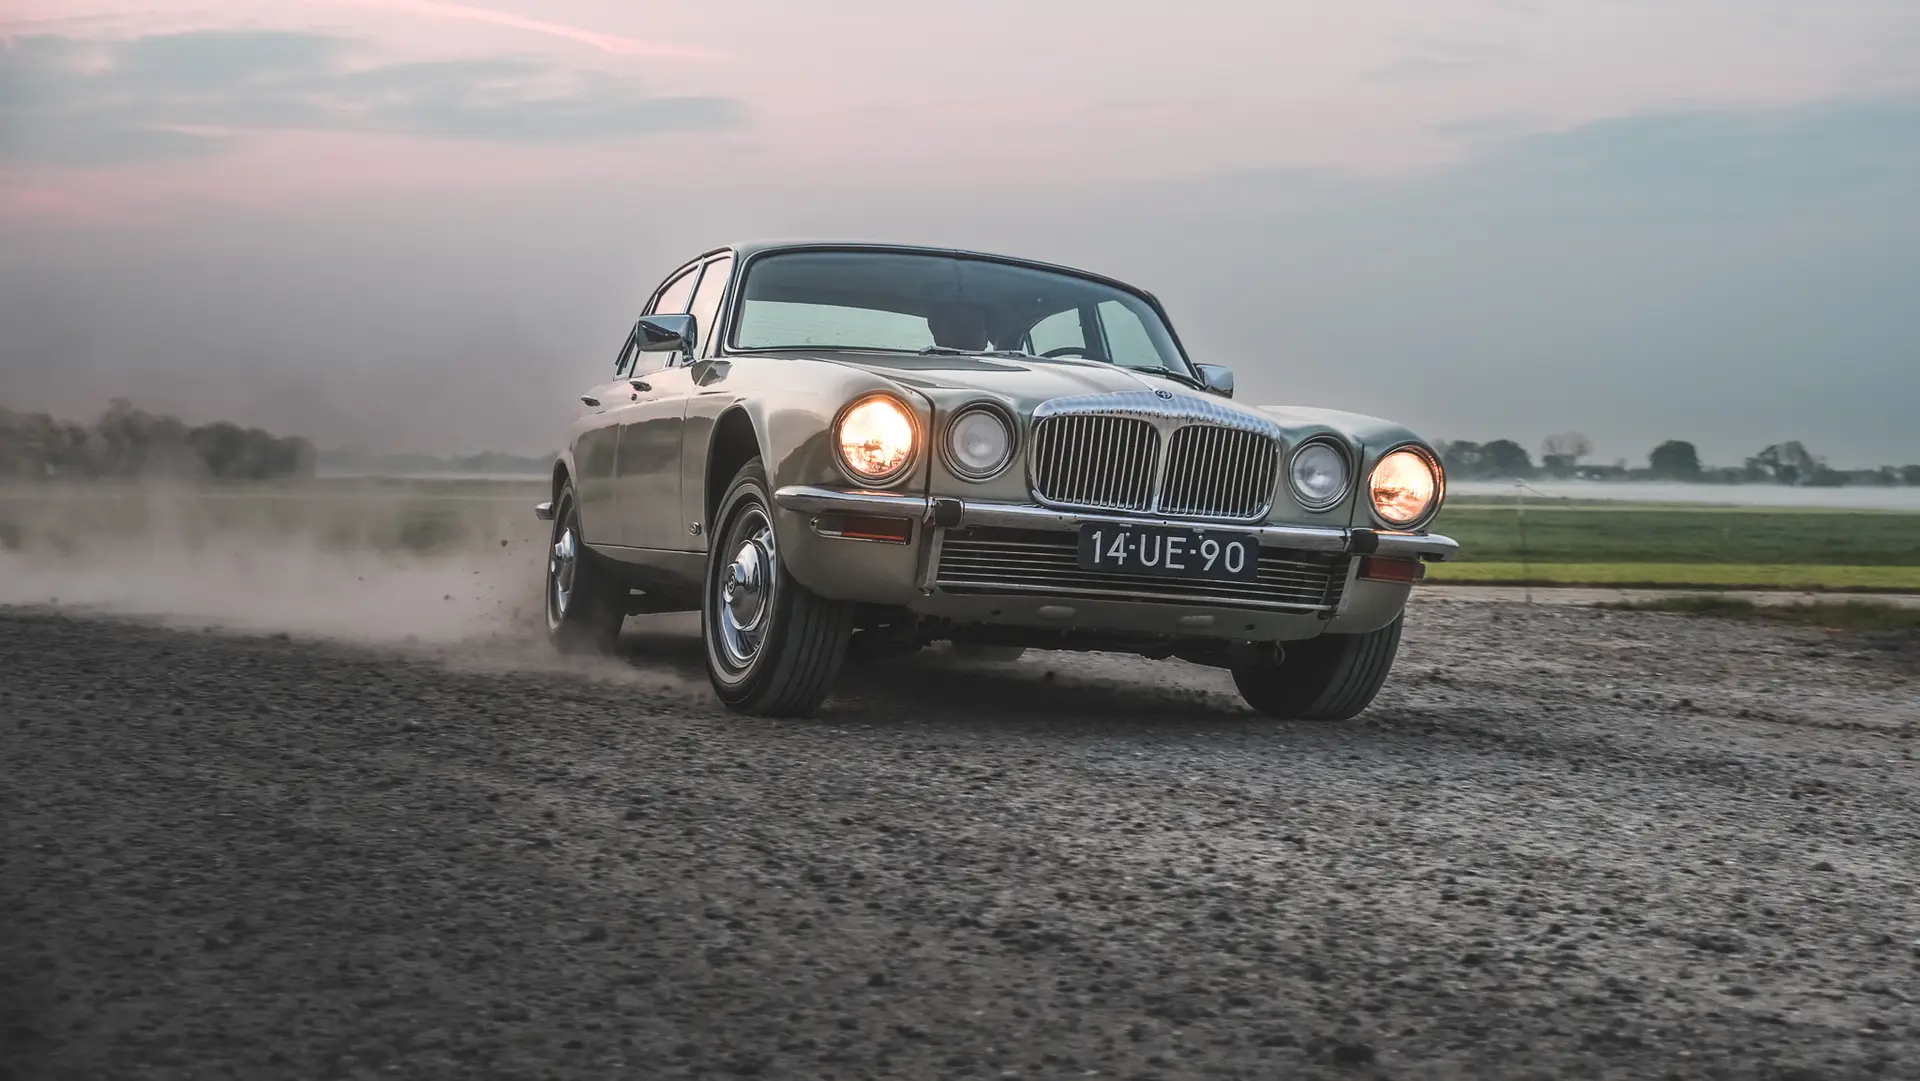 The Jaguar XJ6 driving over the dirt